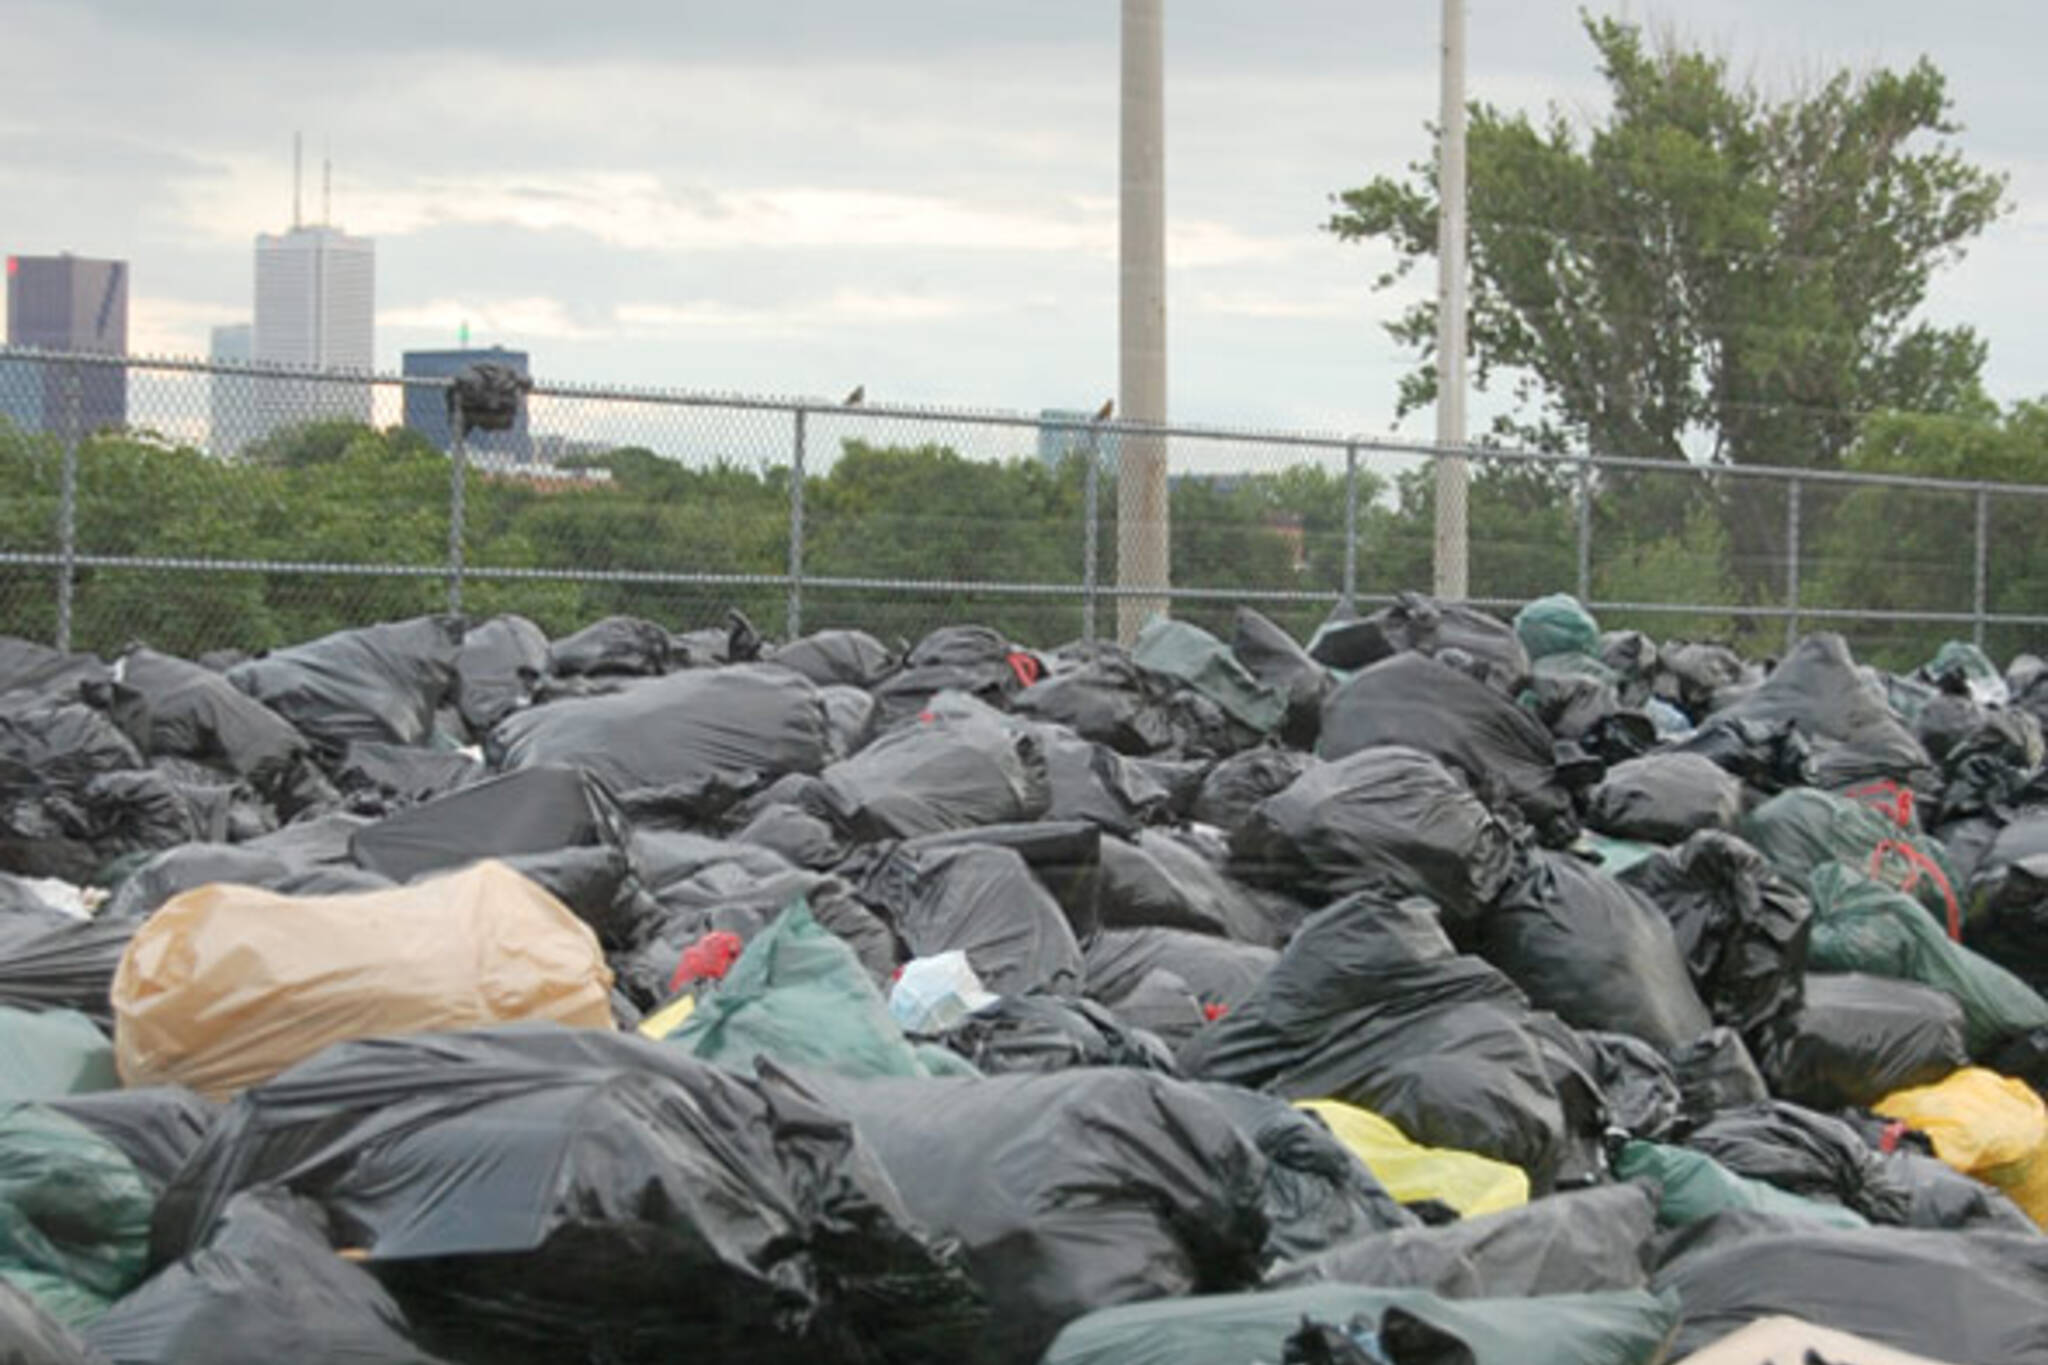 toronto private garbage removal services